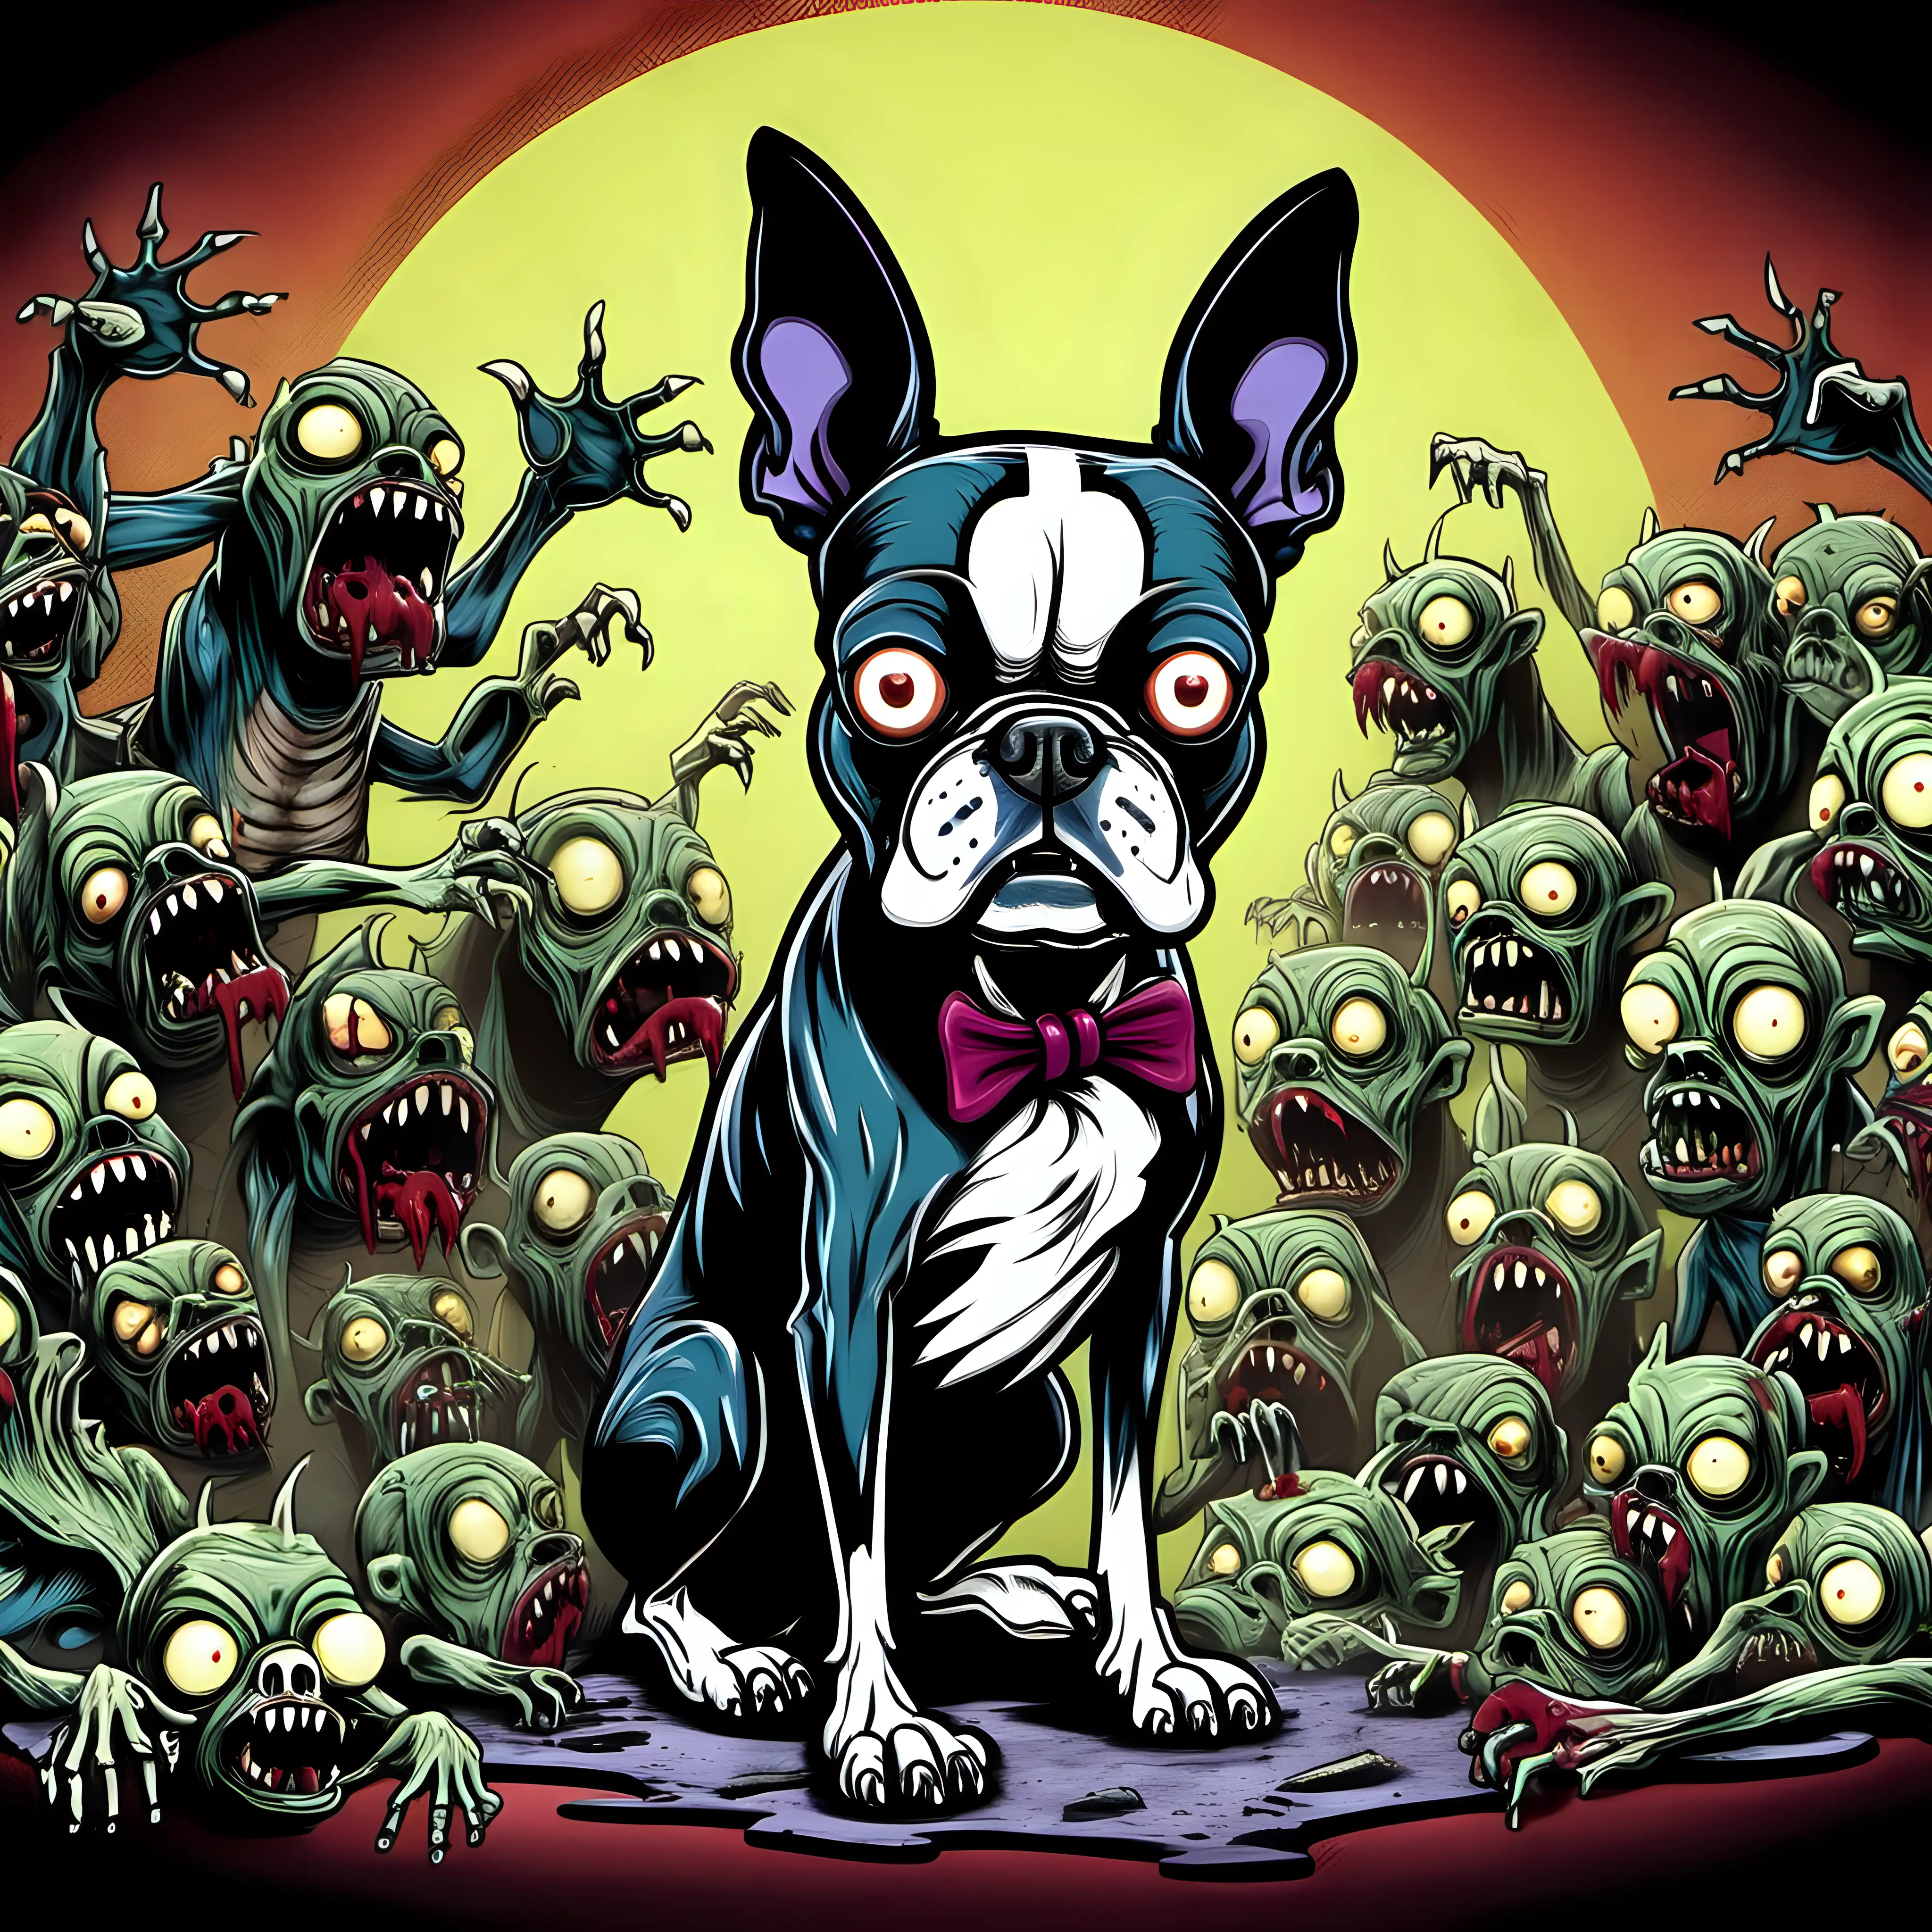 Zombie Boston Terrier Monster in Retro 1970s Animation Style